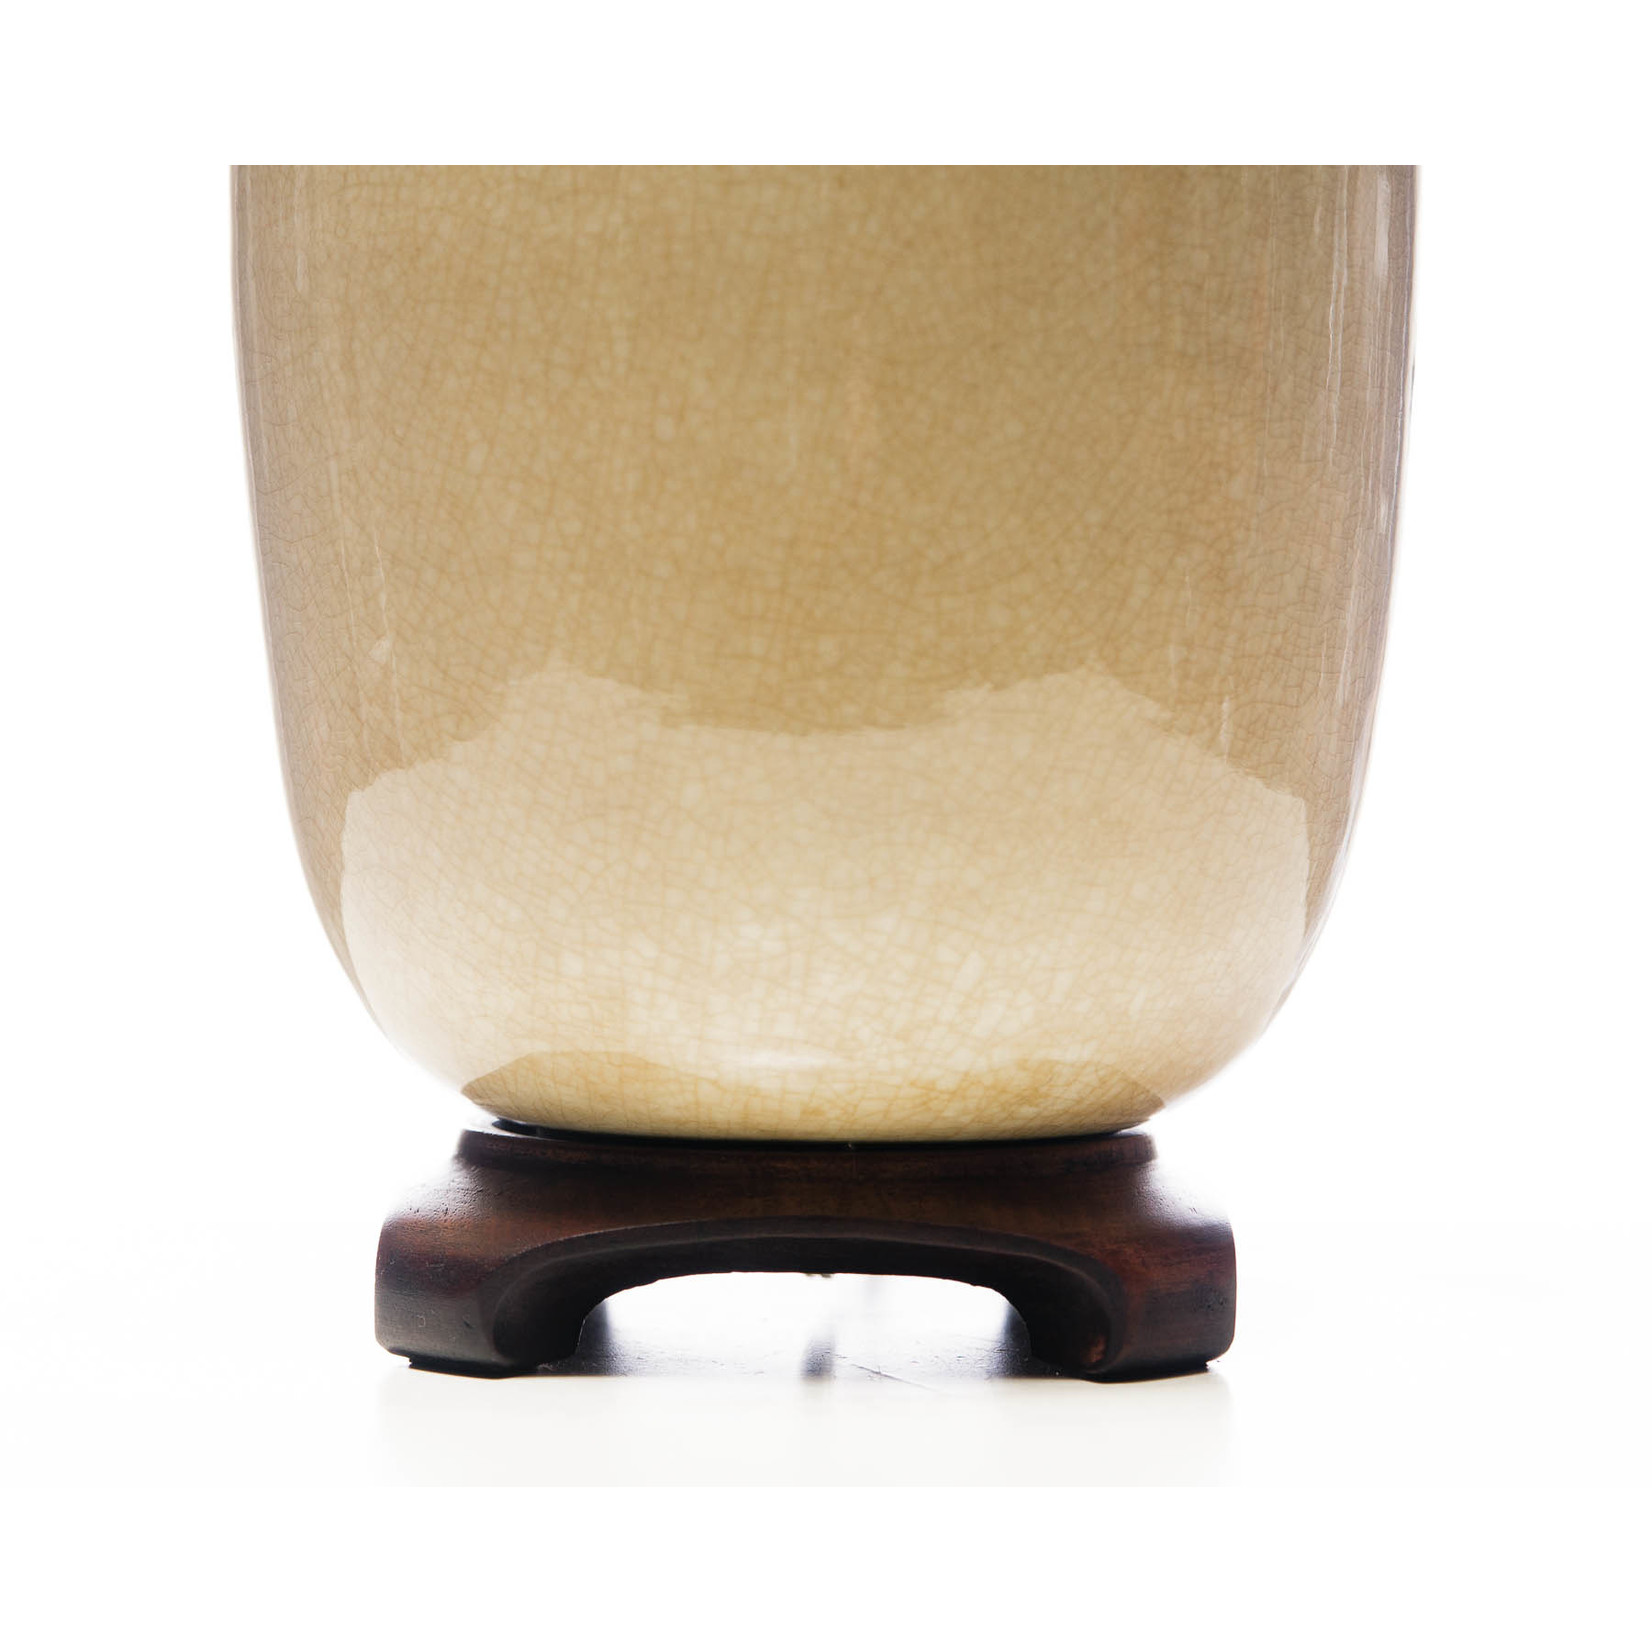 Lawrence & Scott Legacy Lagom Lantern Lamp in Cream Crackle with Rosewood Base (NYC Sample)